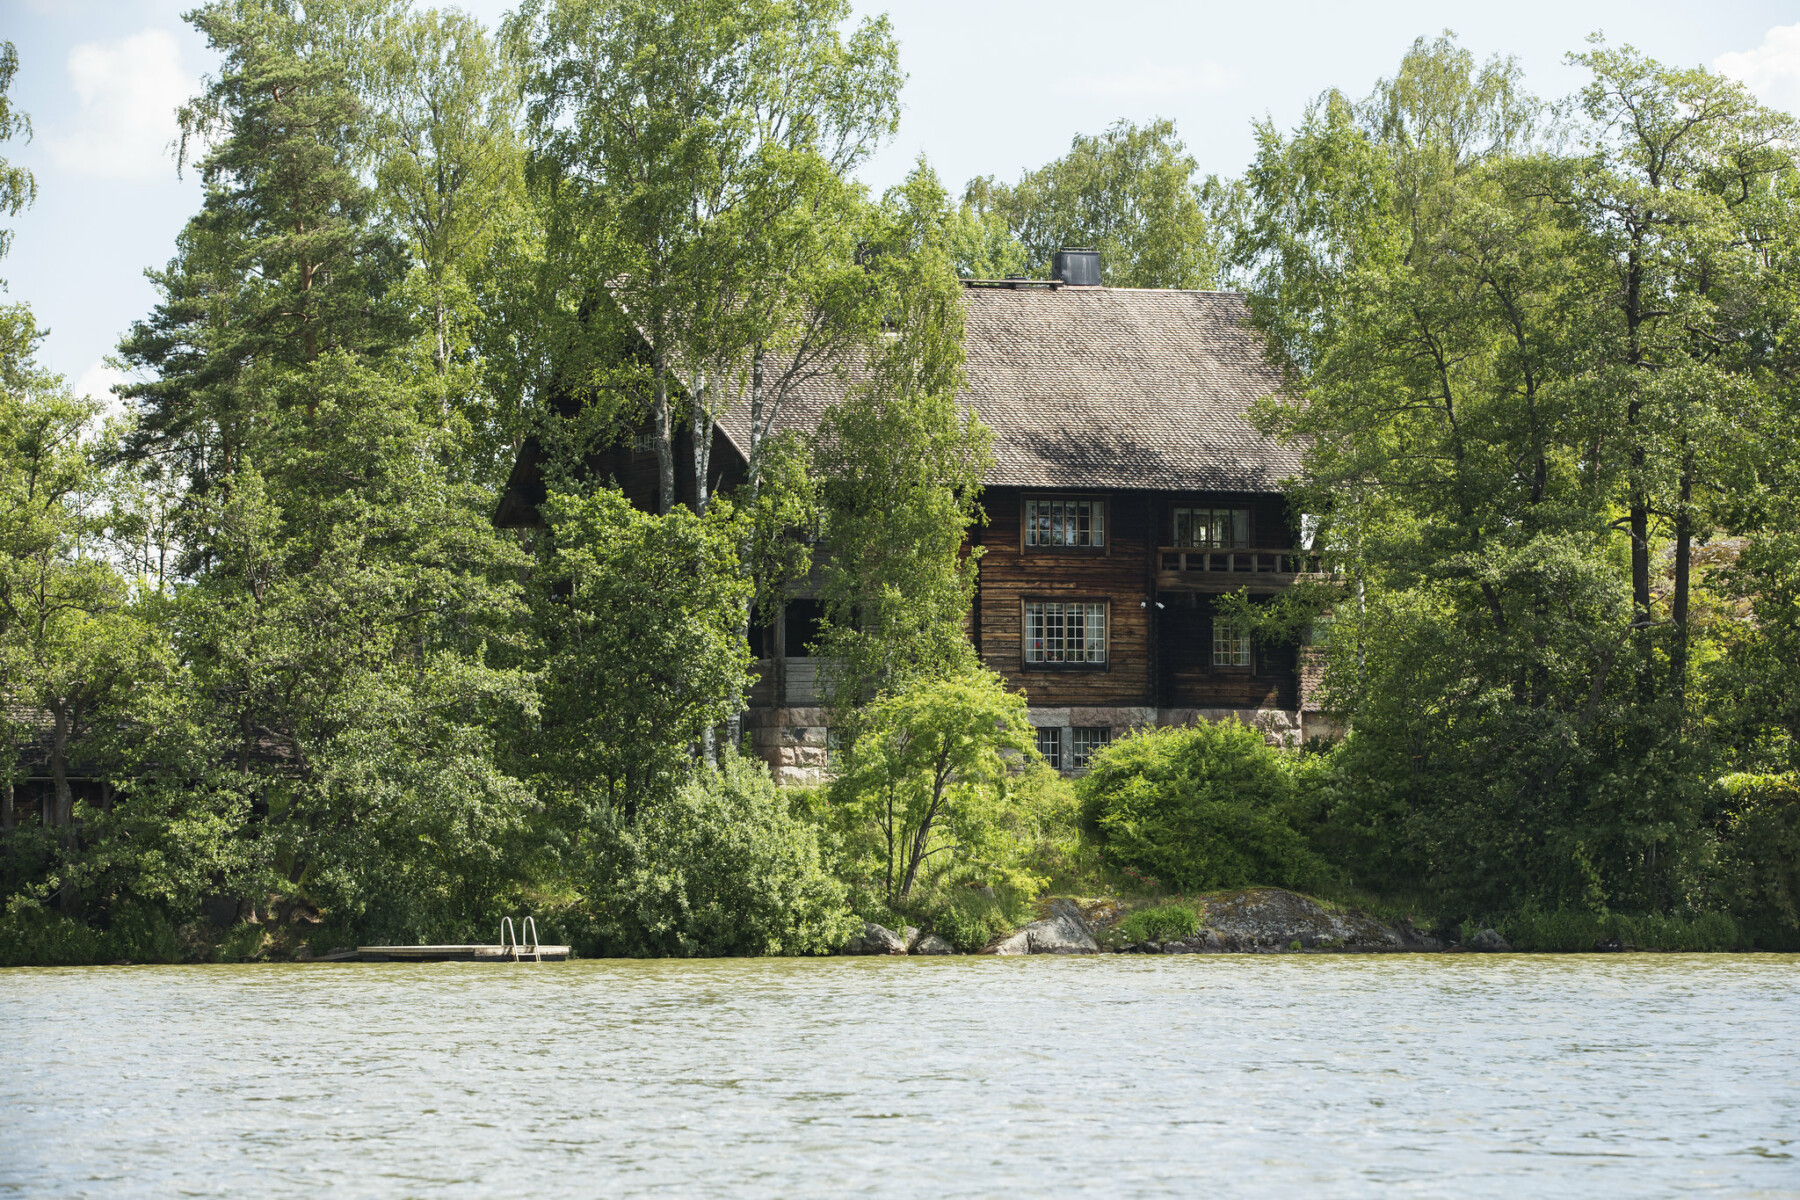 A view from the middle of a lake shows an expanse of water and a shoreline with trees and a brown wooden house.